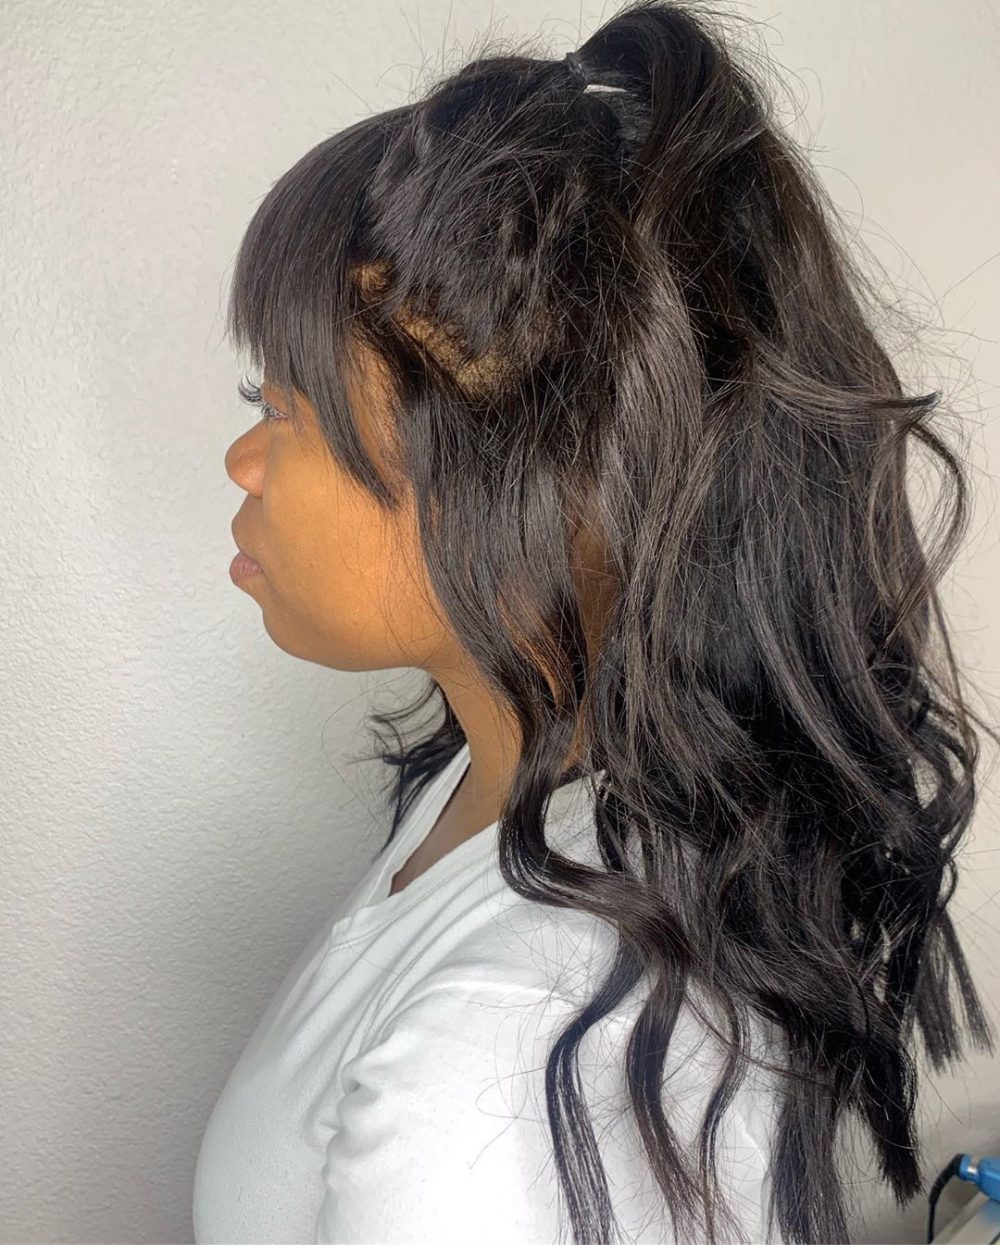 Sew-in hairstyle featuring bangs